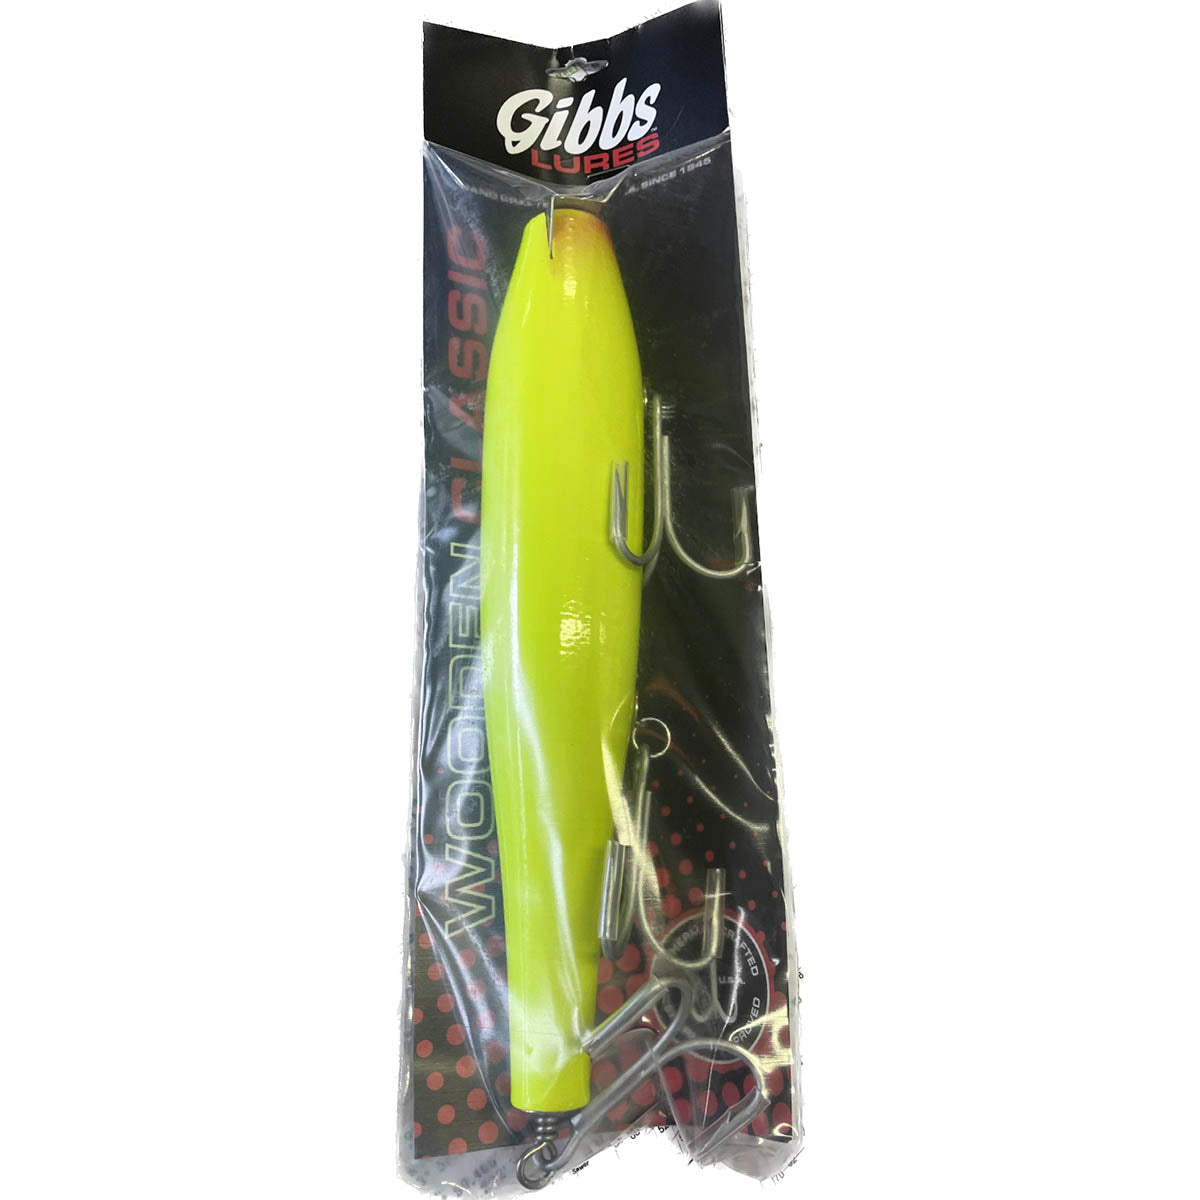 Tackle Box x Gibbs Wooden Classic Troller 3 oz - Chartreuse – Tackle Box NJ